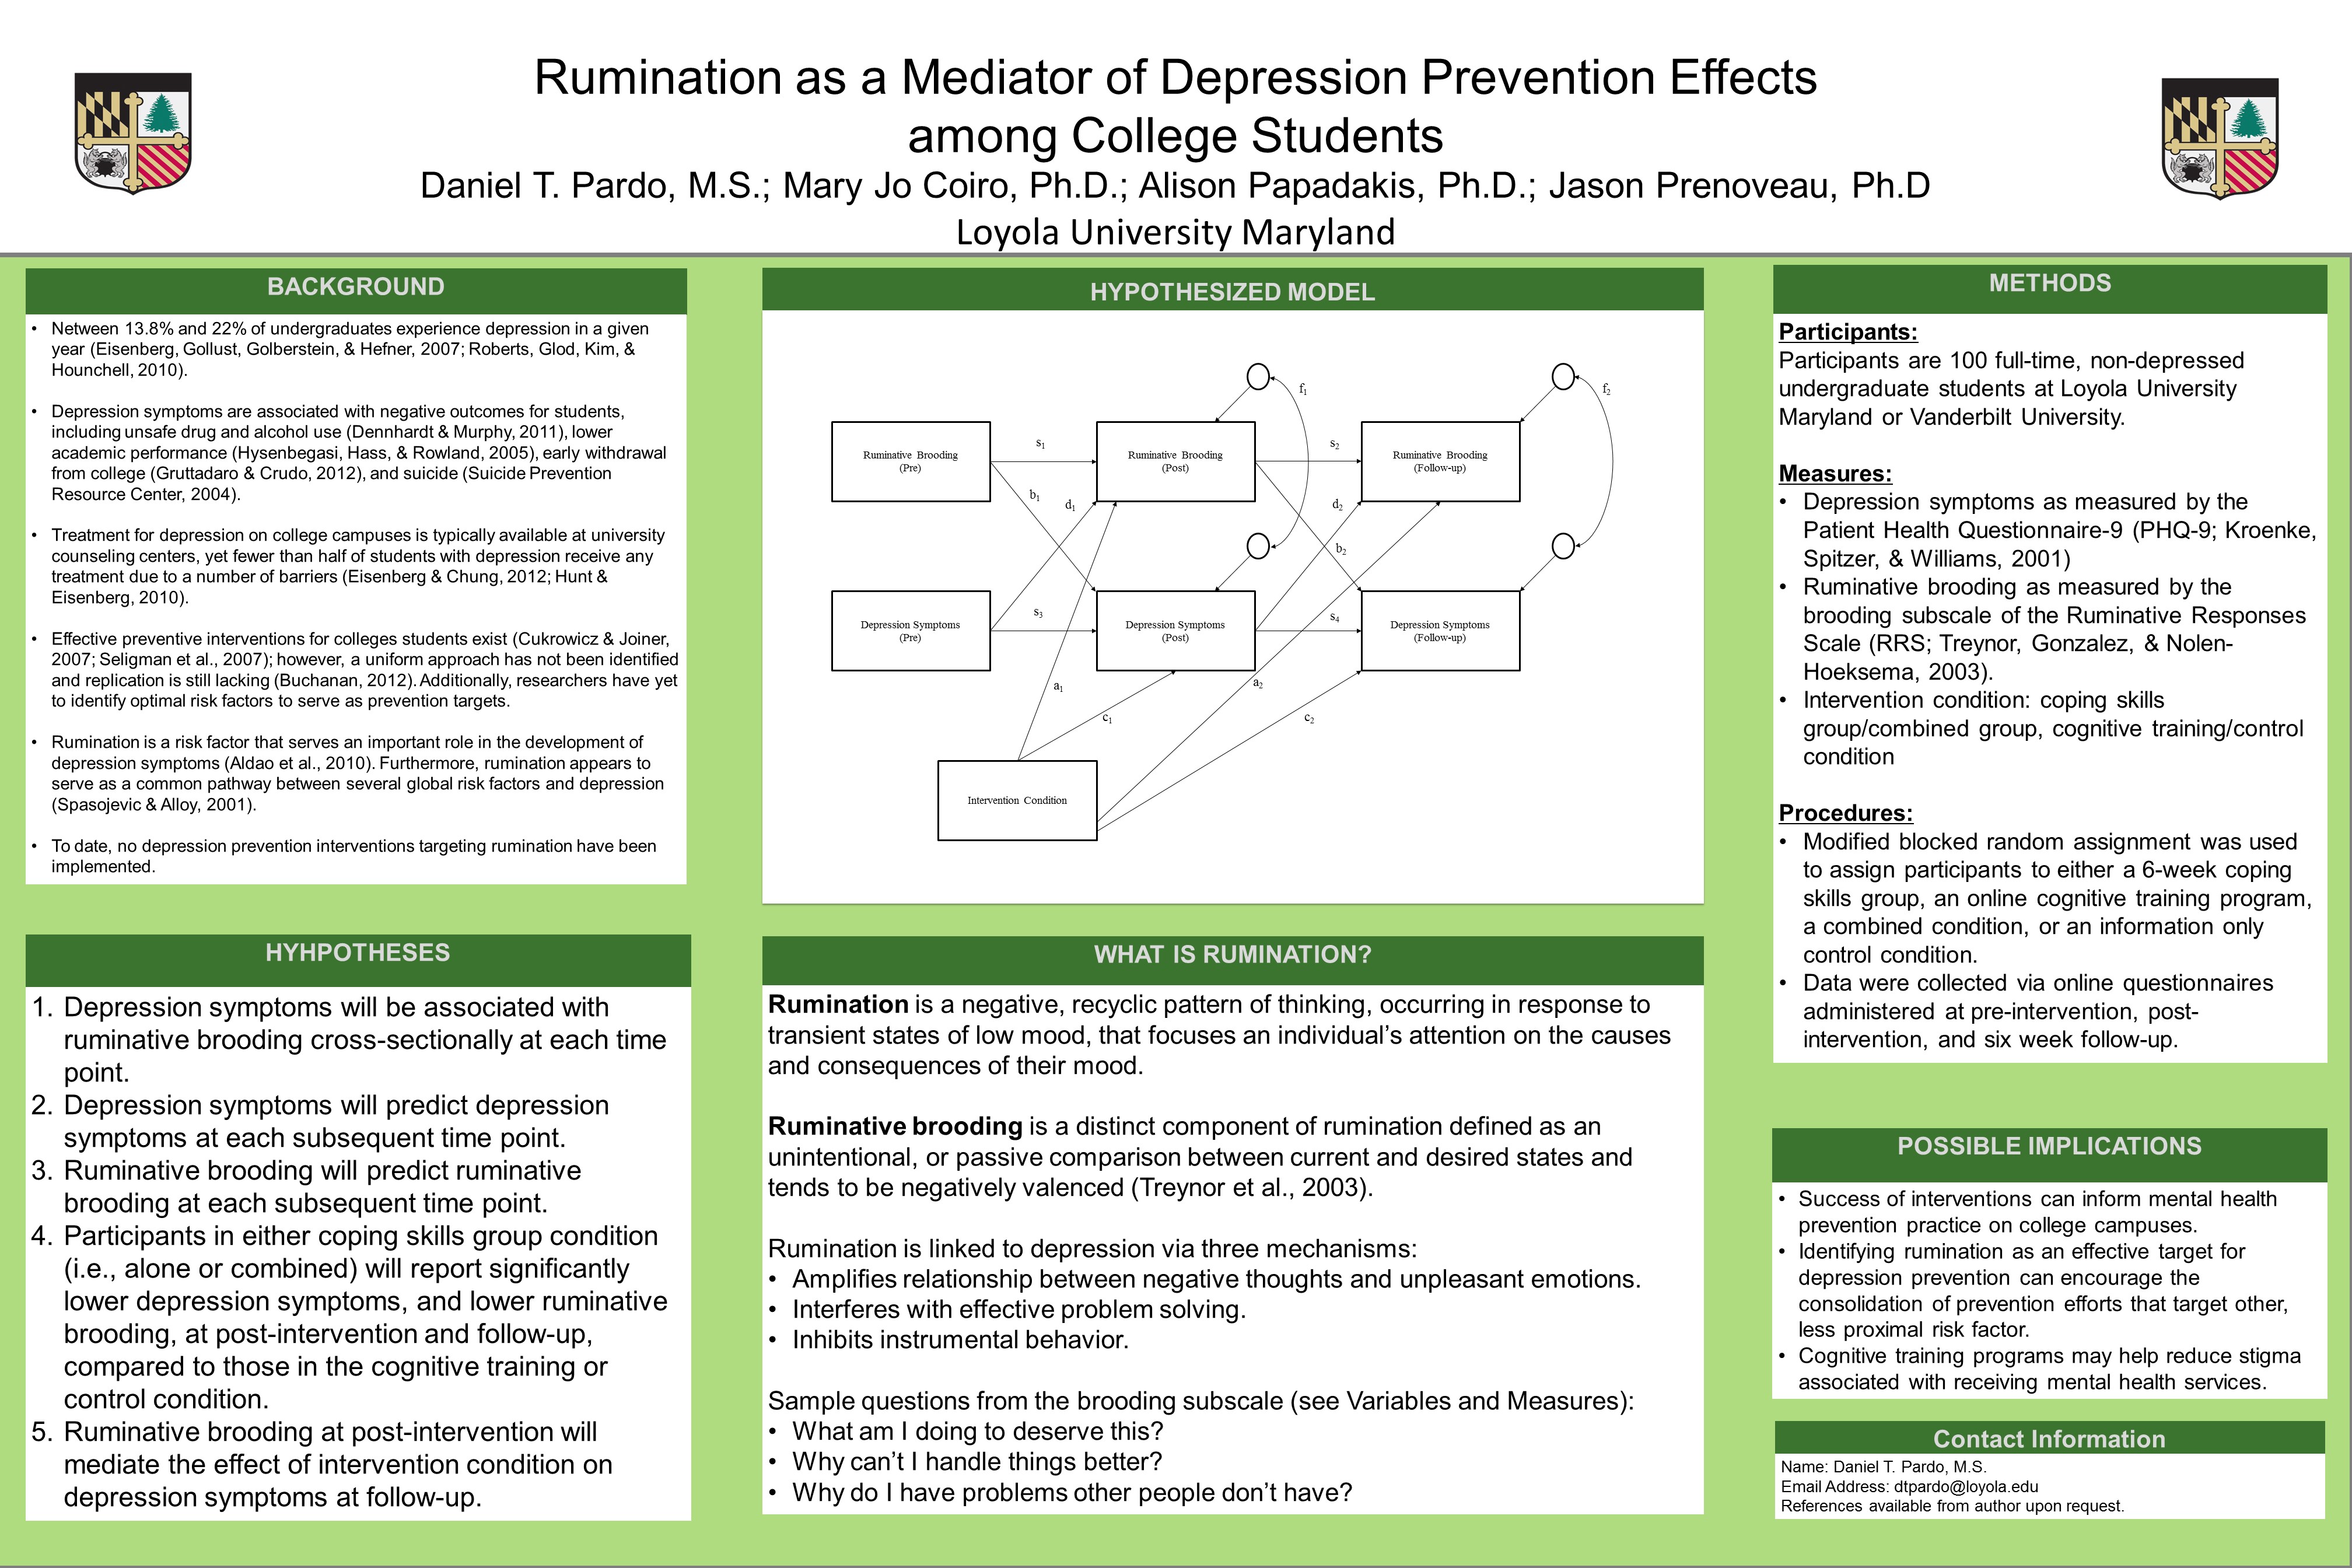 poster image: Rumination as a Mediator of Depression Prevention Effects among College Students